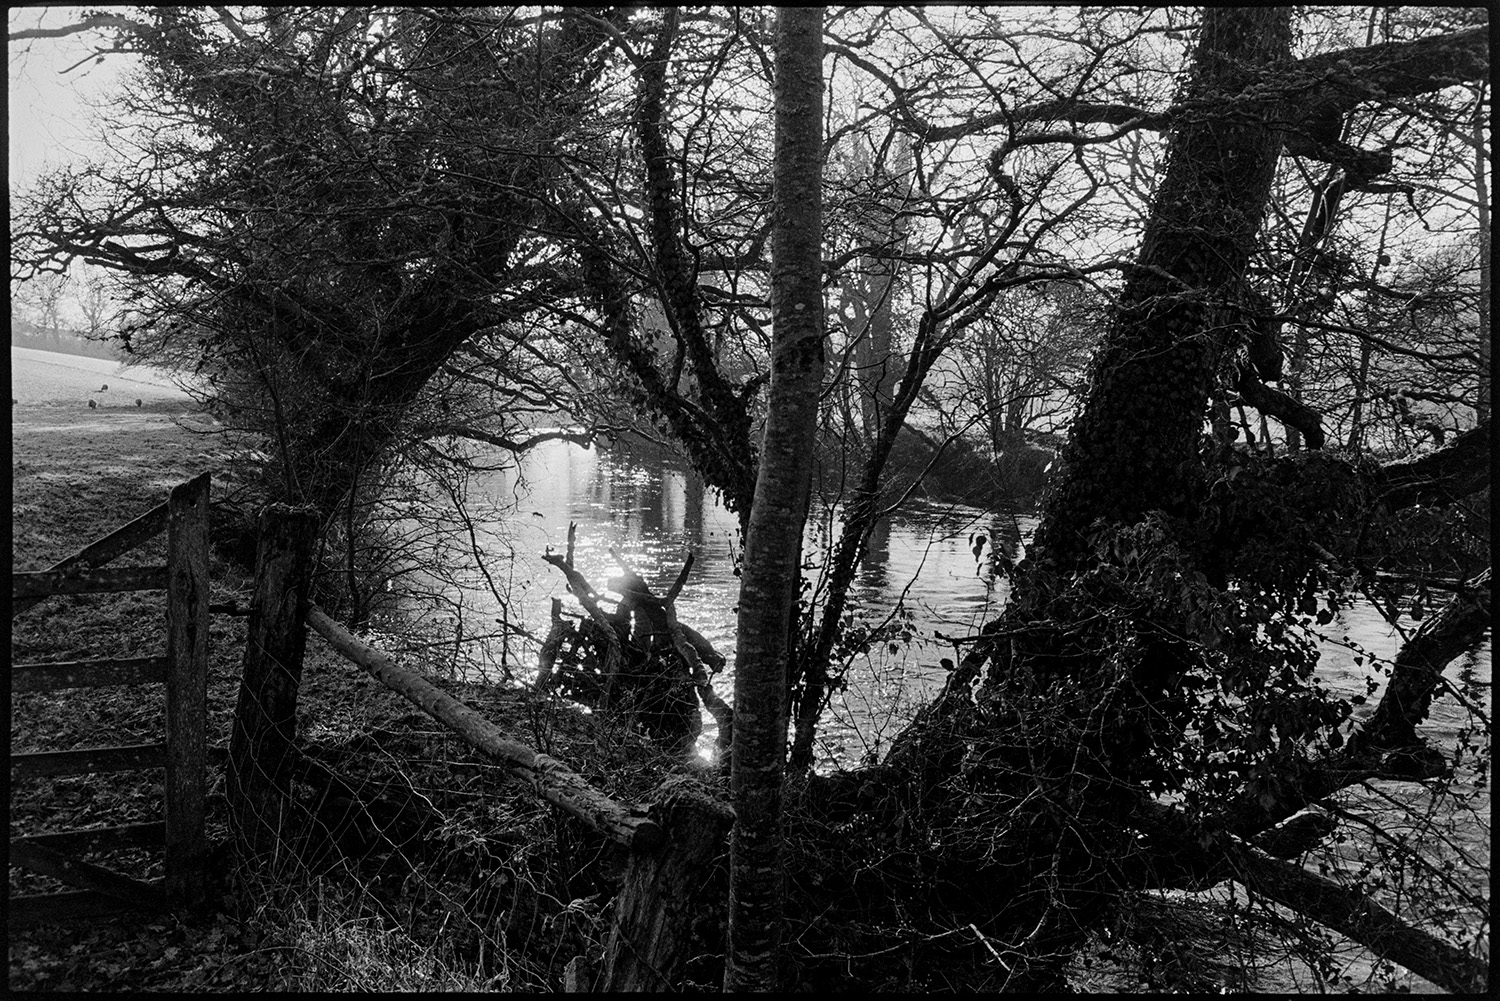 Trees at the edge of the river. 
[Trees along the bank of the River Torridge at Lower Langham, Dolton. A field gate can also be seen in the foreground.]